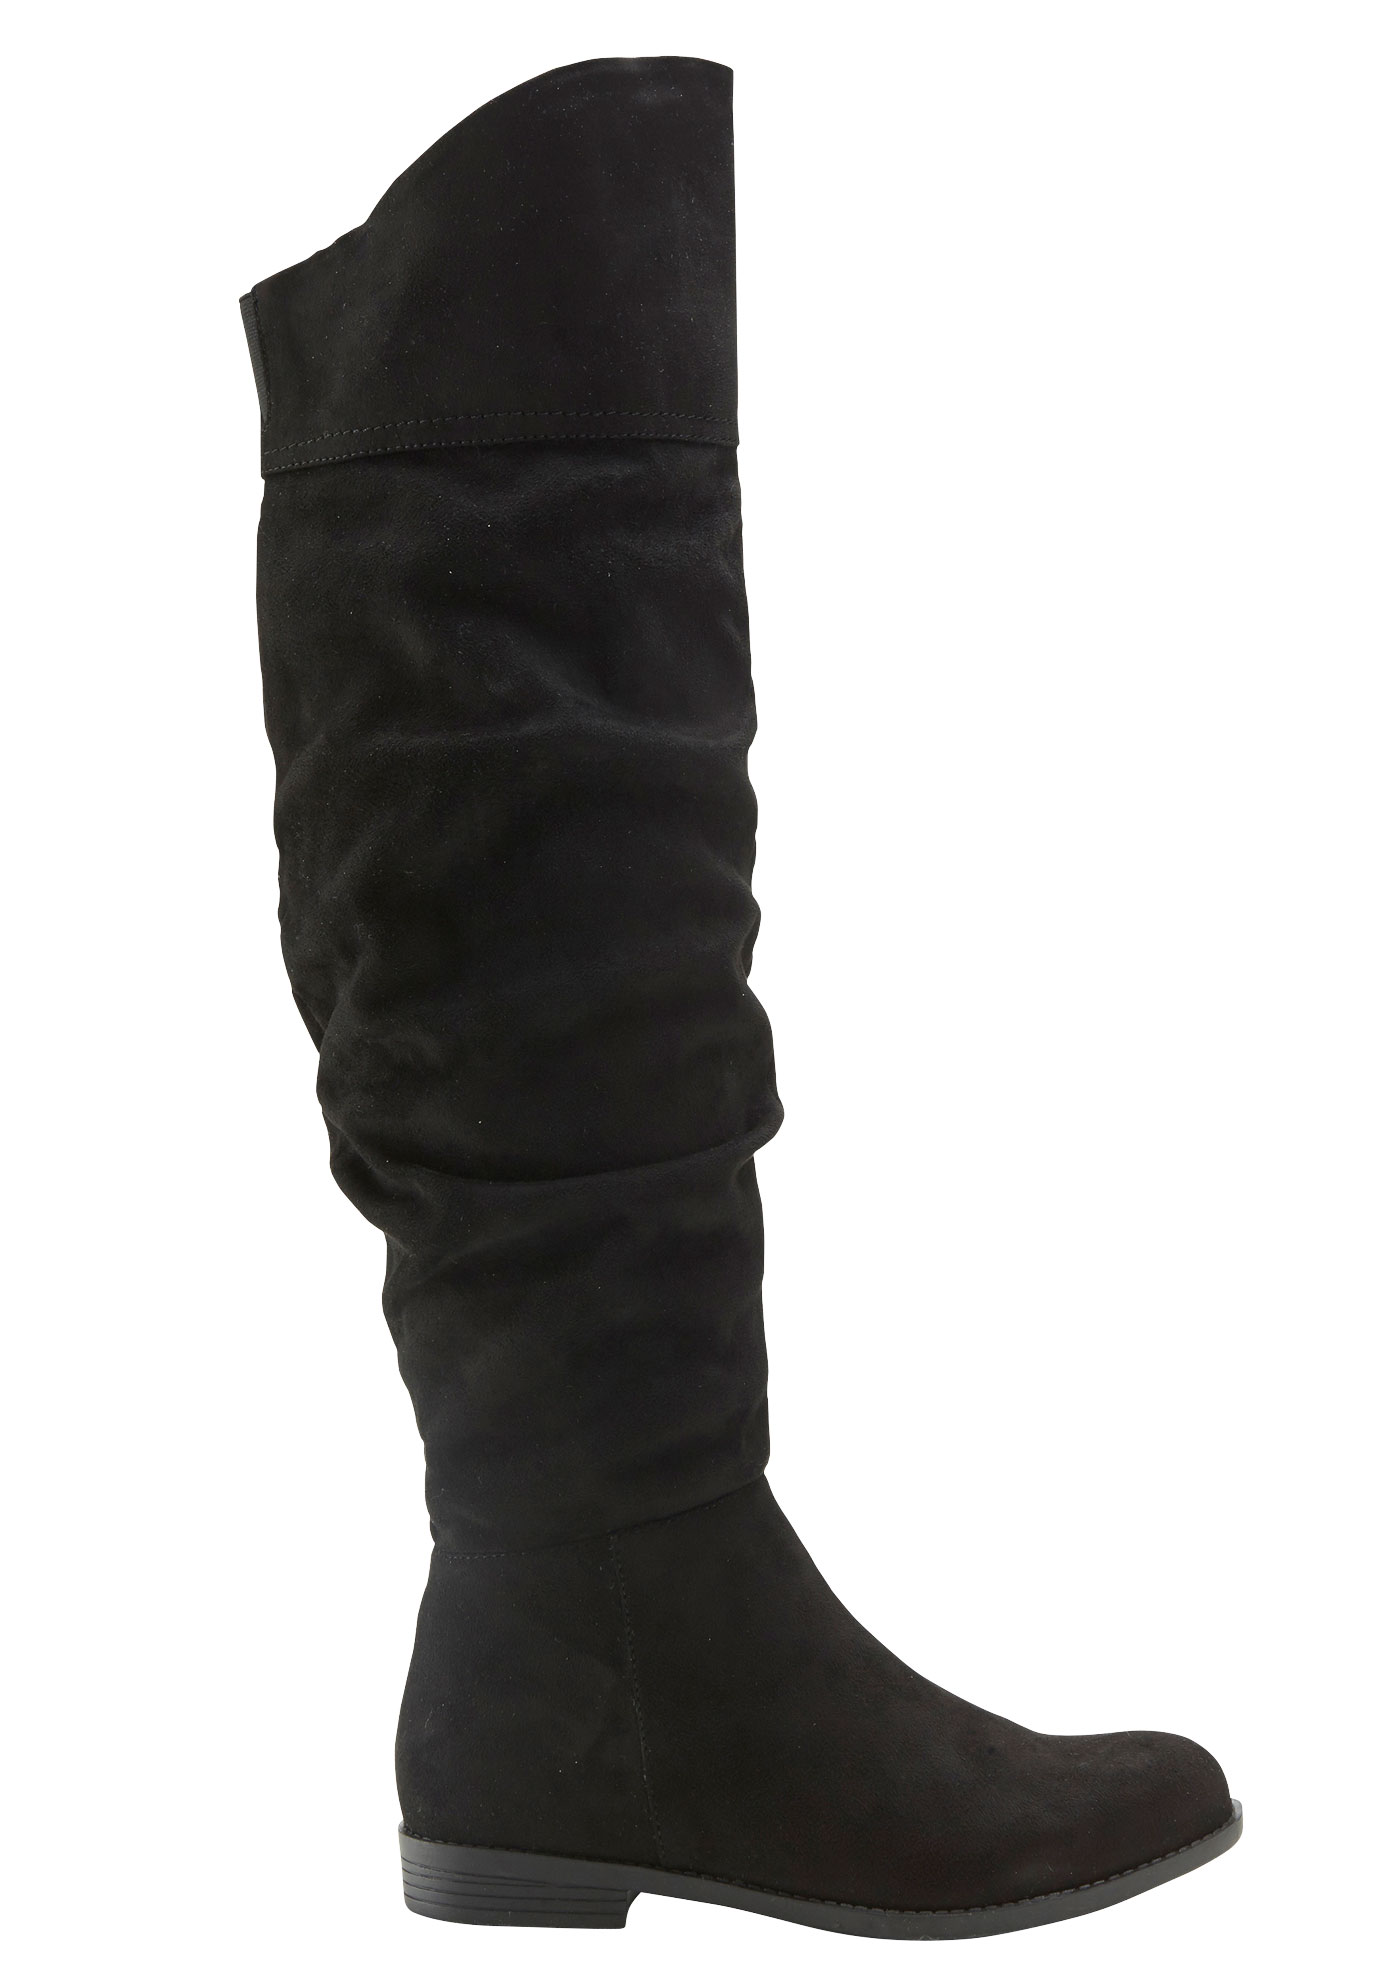 Over-the-Knee Faux Suede Slouch Boots by ellos®| Plus Size Shoes ...